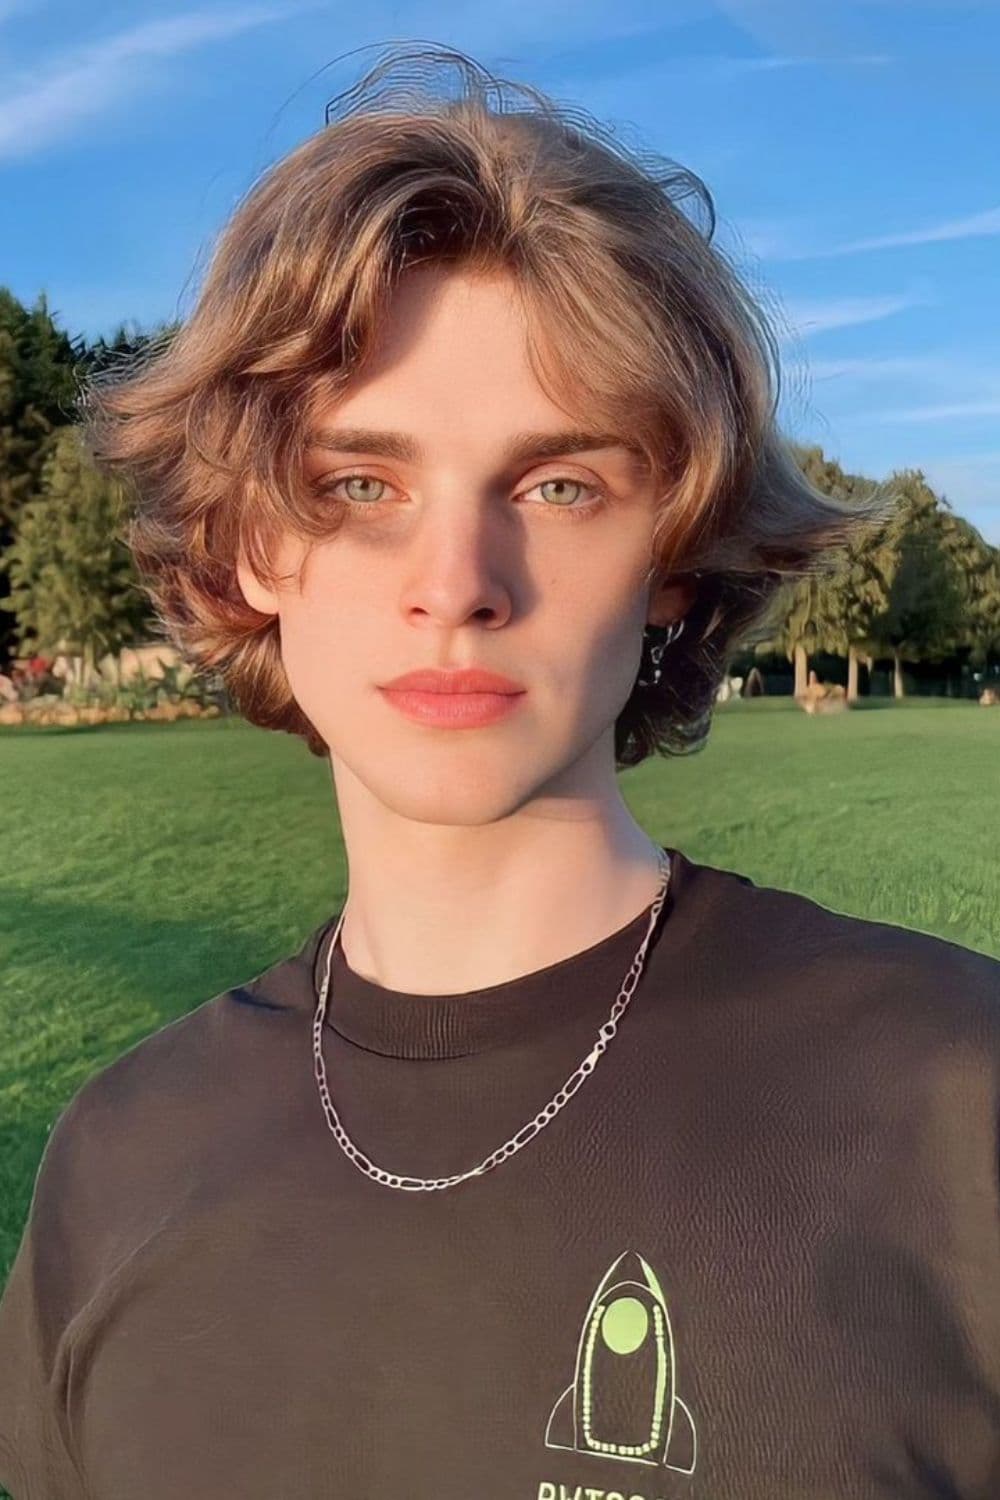 A man wearing a black t-shirt and a silver necklace with blonde 90s/eBoy wolf cut.